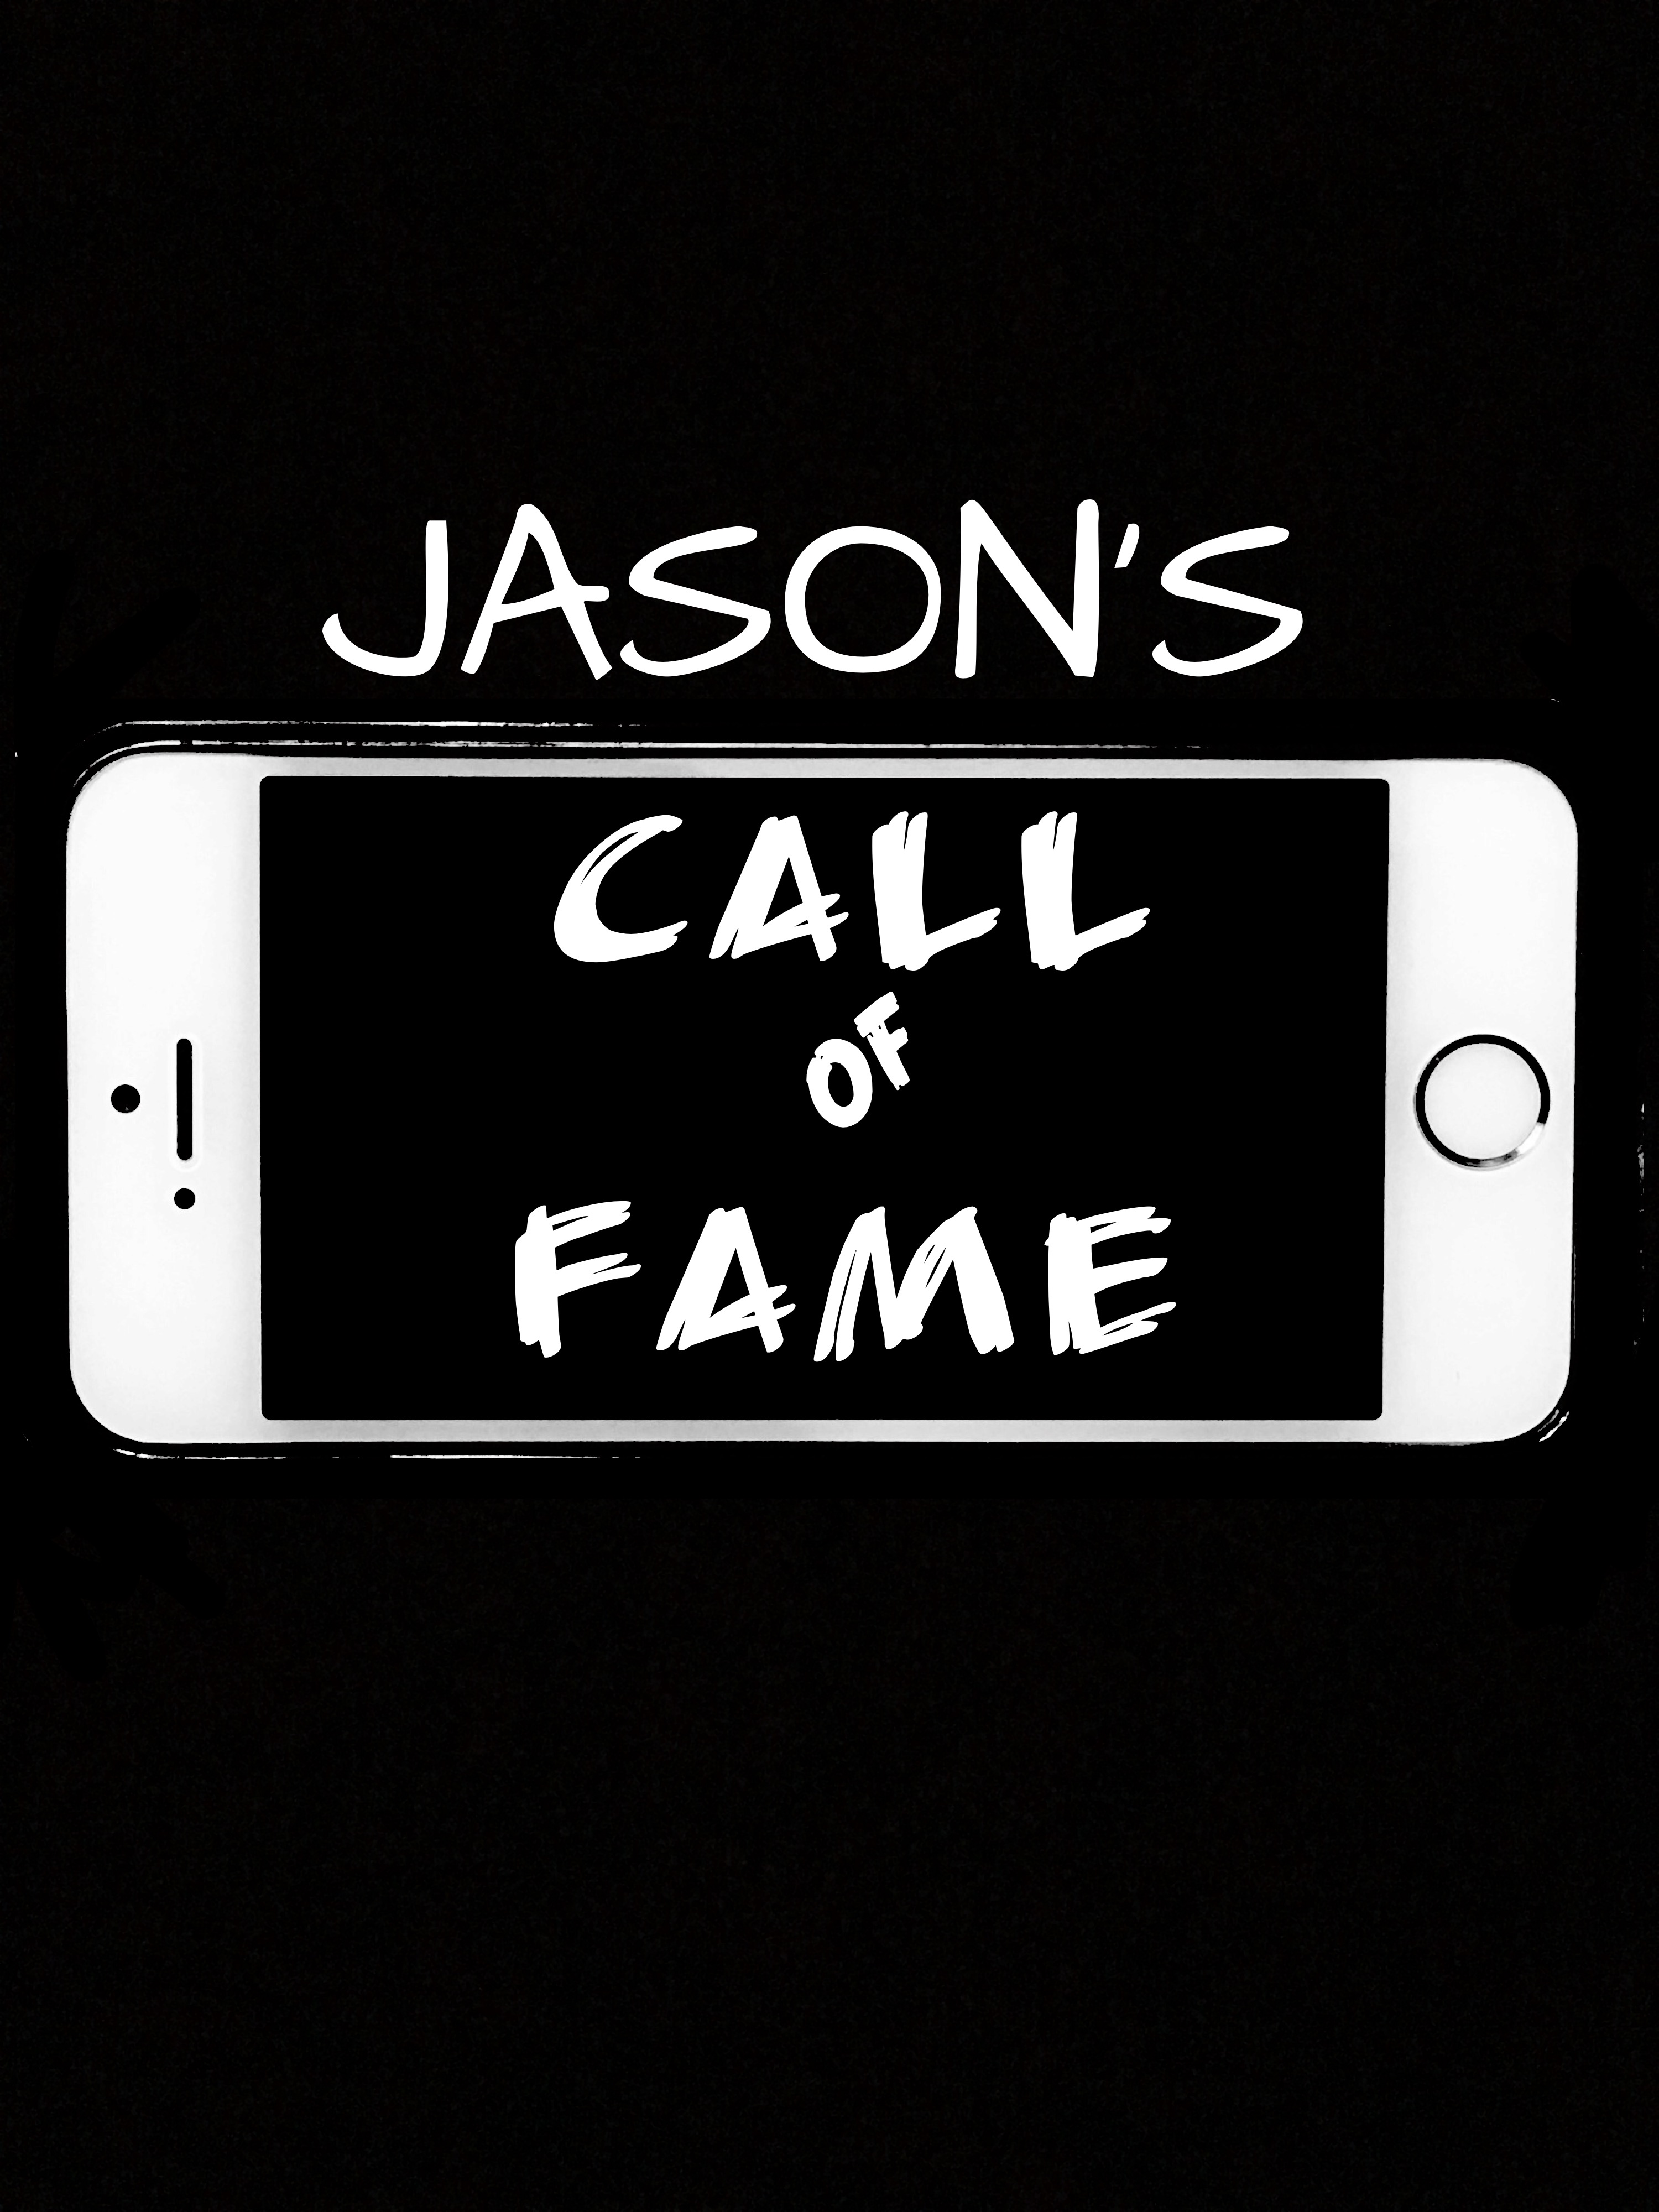 WELCOME TO JASON’S CALL OF FAME!